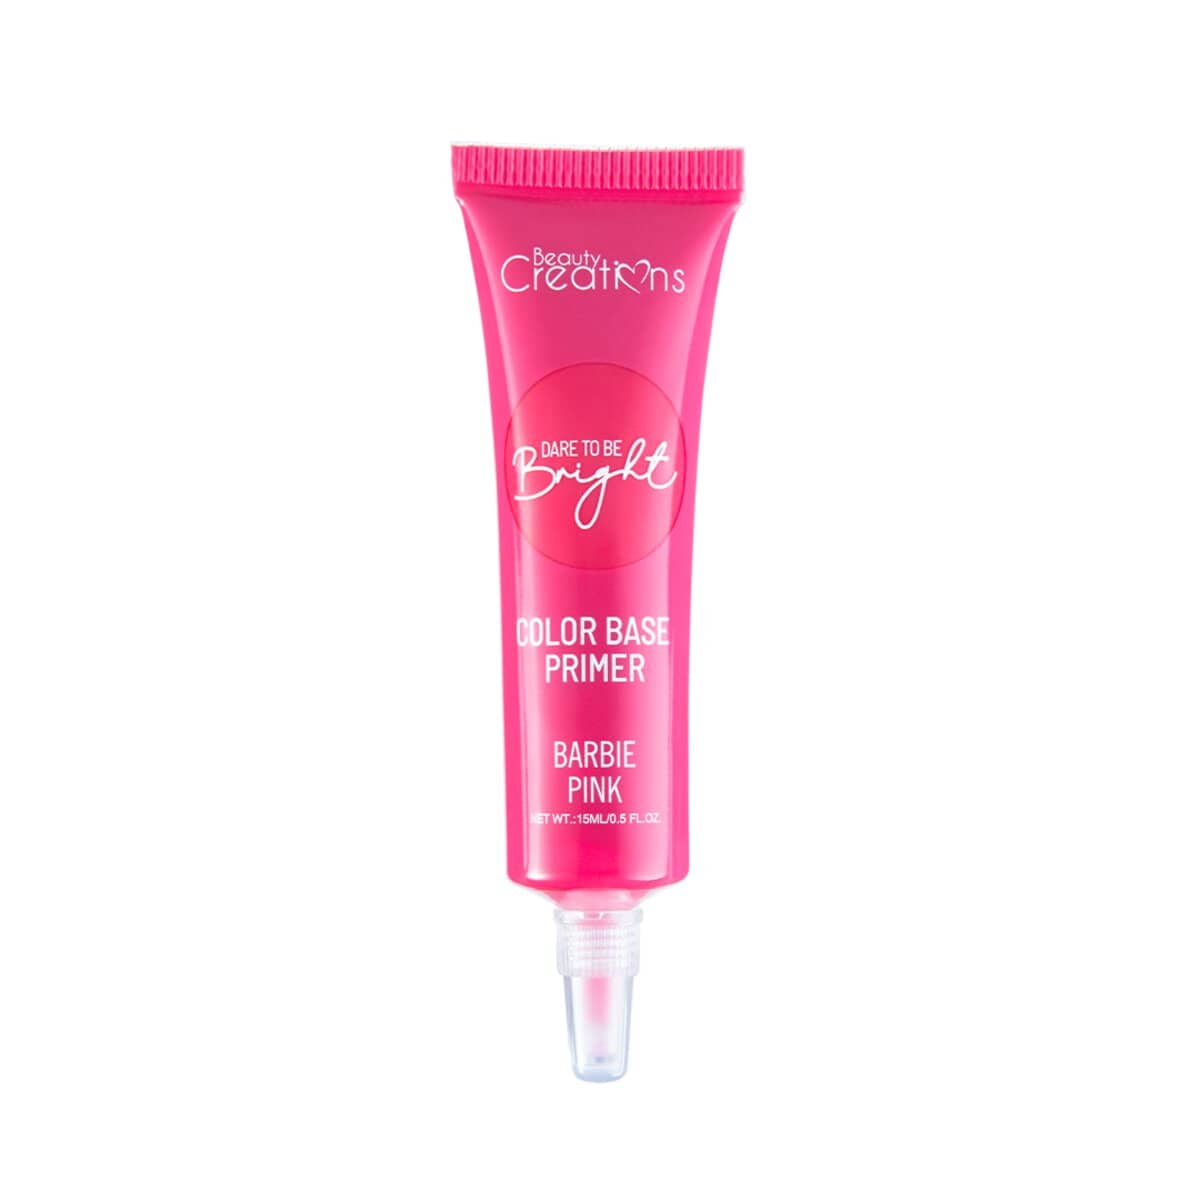 DARE TO BE BRIGHT EYE BASE COLOR PRIMER BARBIE PINK - BEAUTY CREATIONS